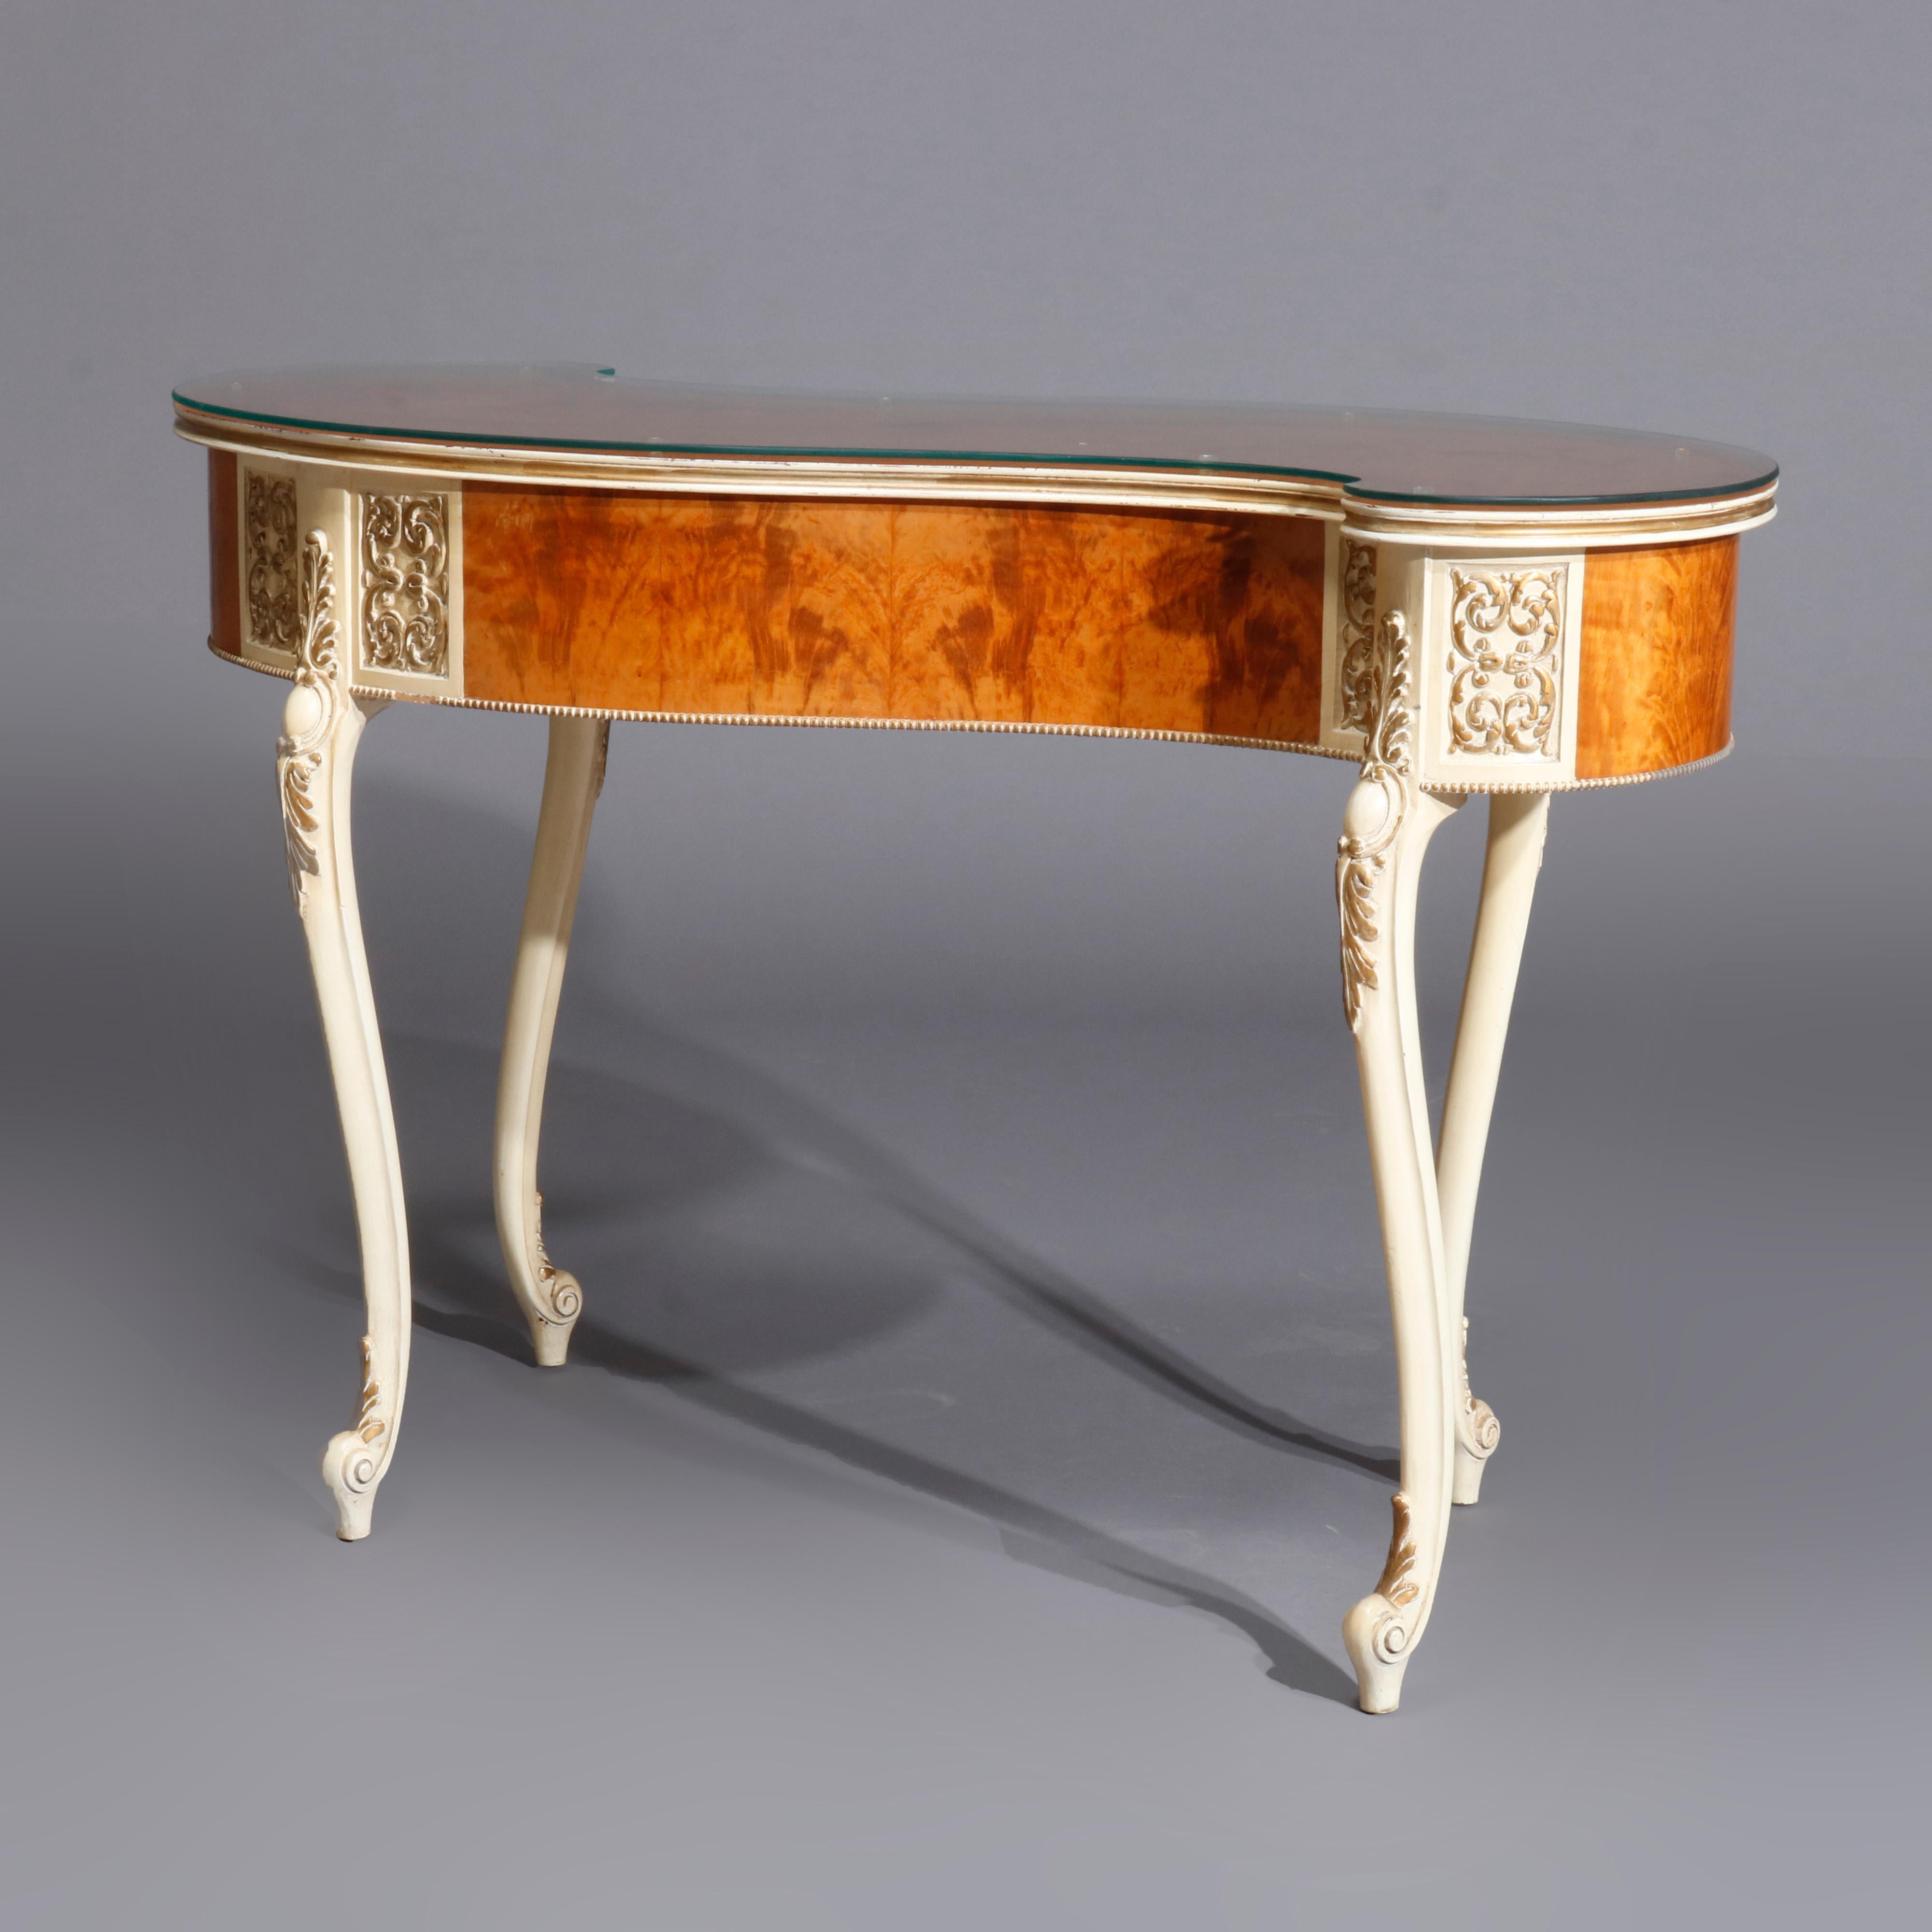 Inlay Antique French Louis XIV Style Satinwood Kidney Form Ladies Desk, circa 1930